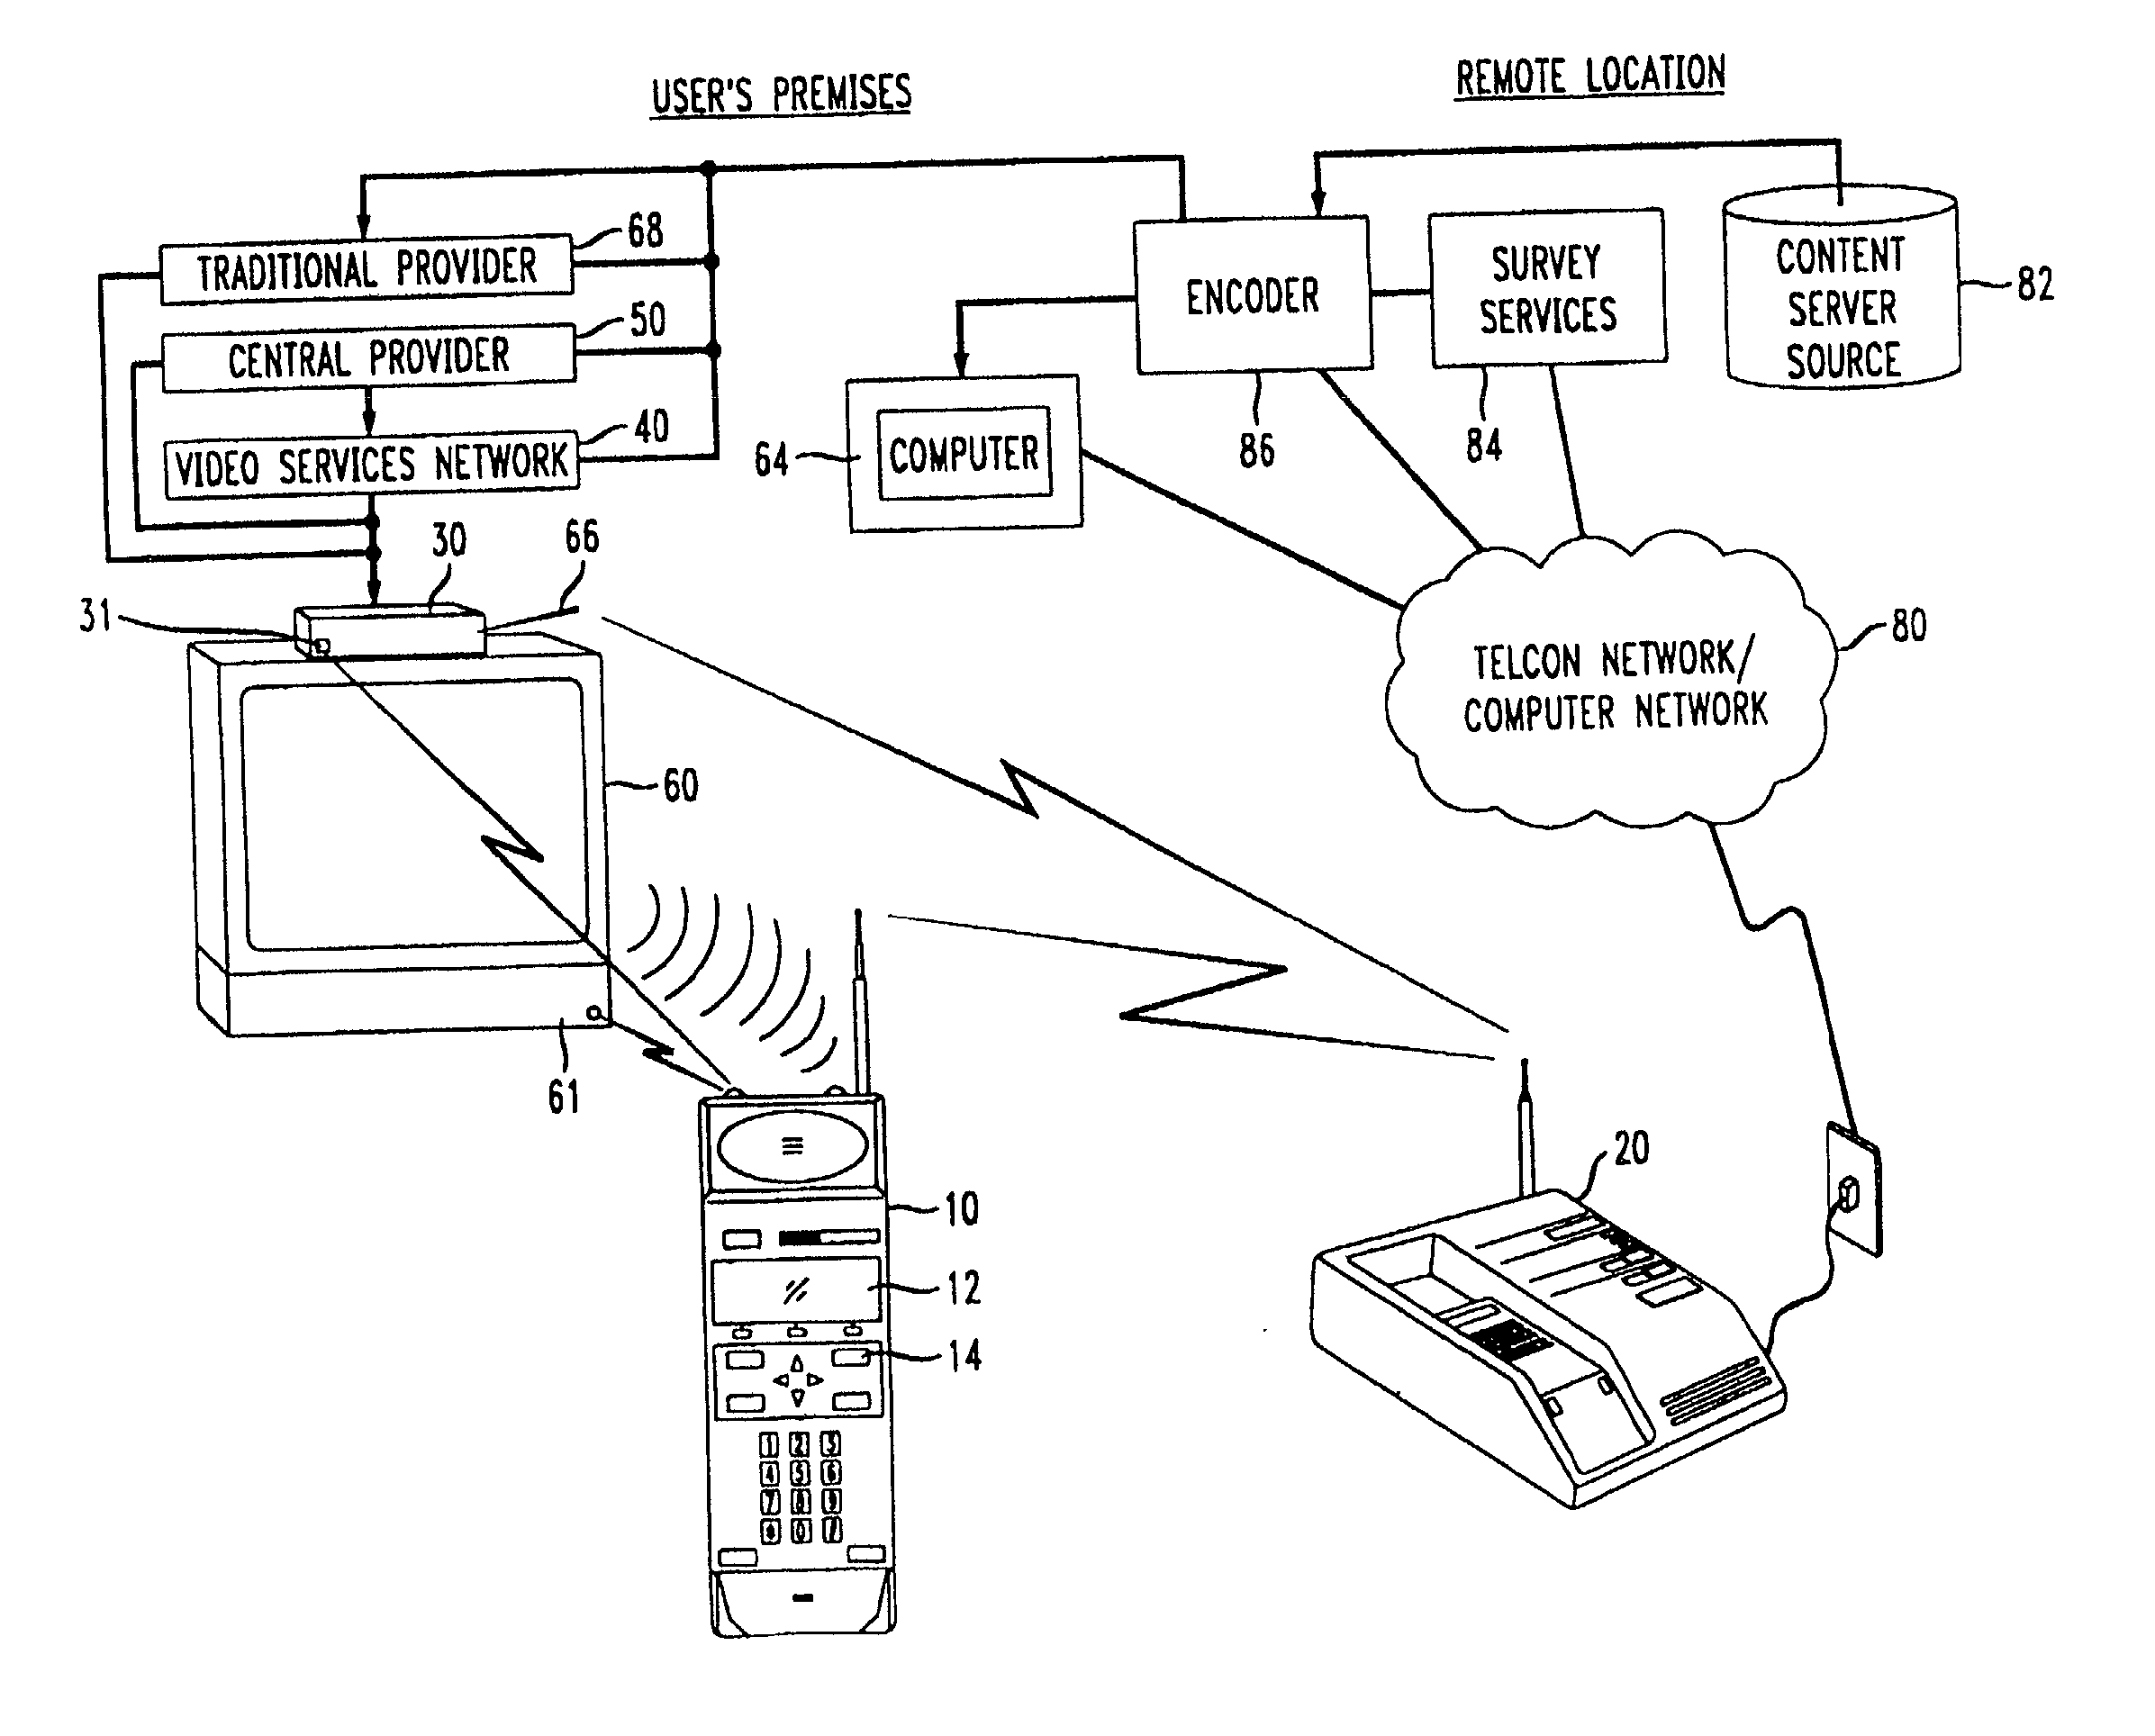 System and method for obtaining real time survey information for media programming using input device